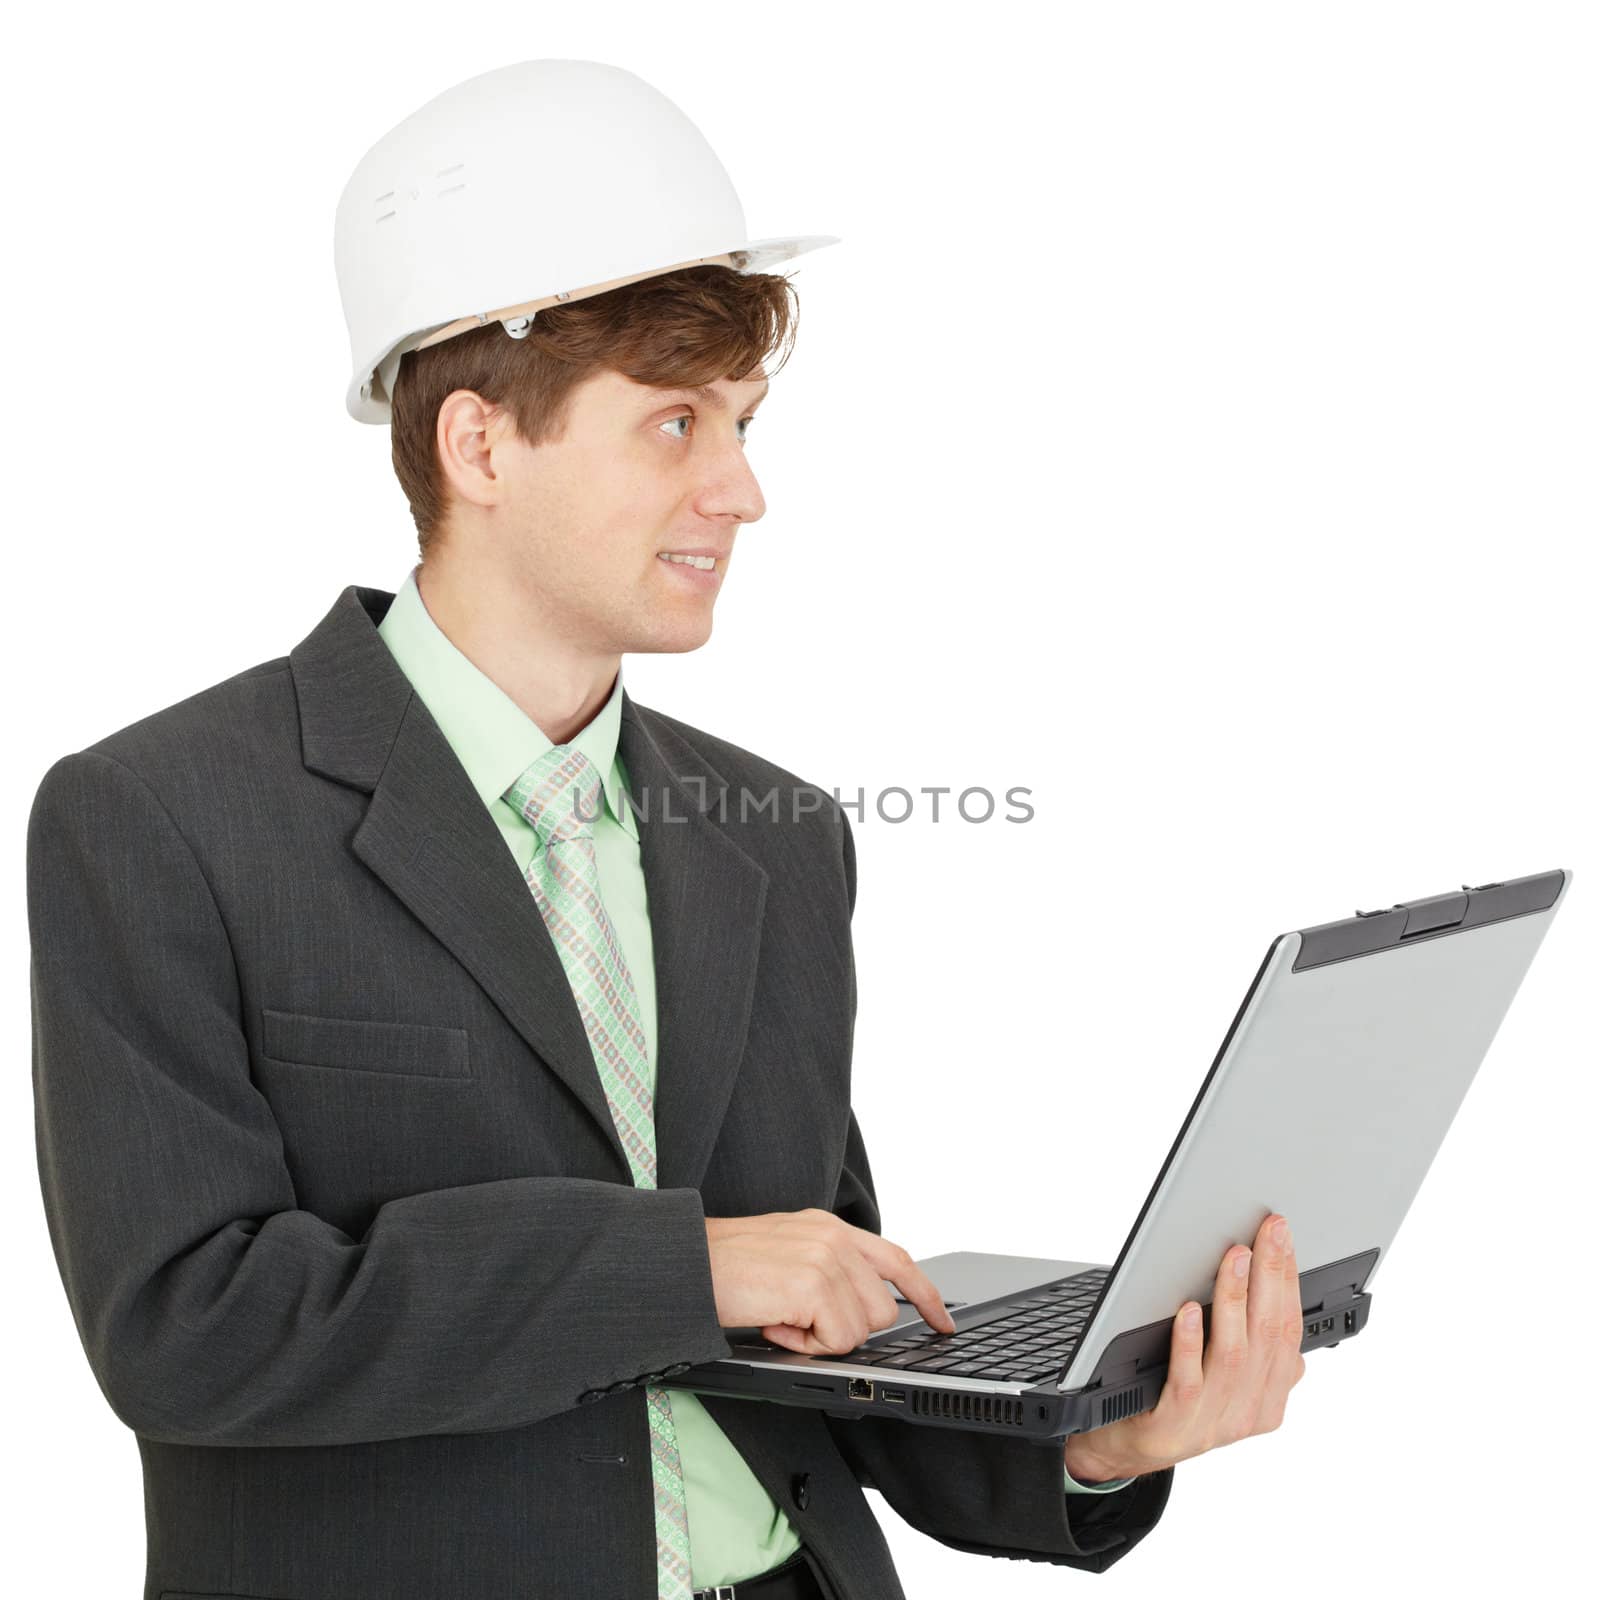 The smiling engineer in a white helmet with the laptop in hands